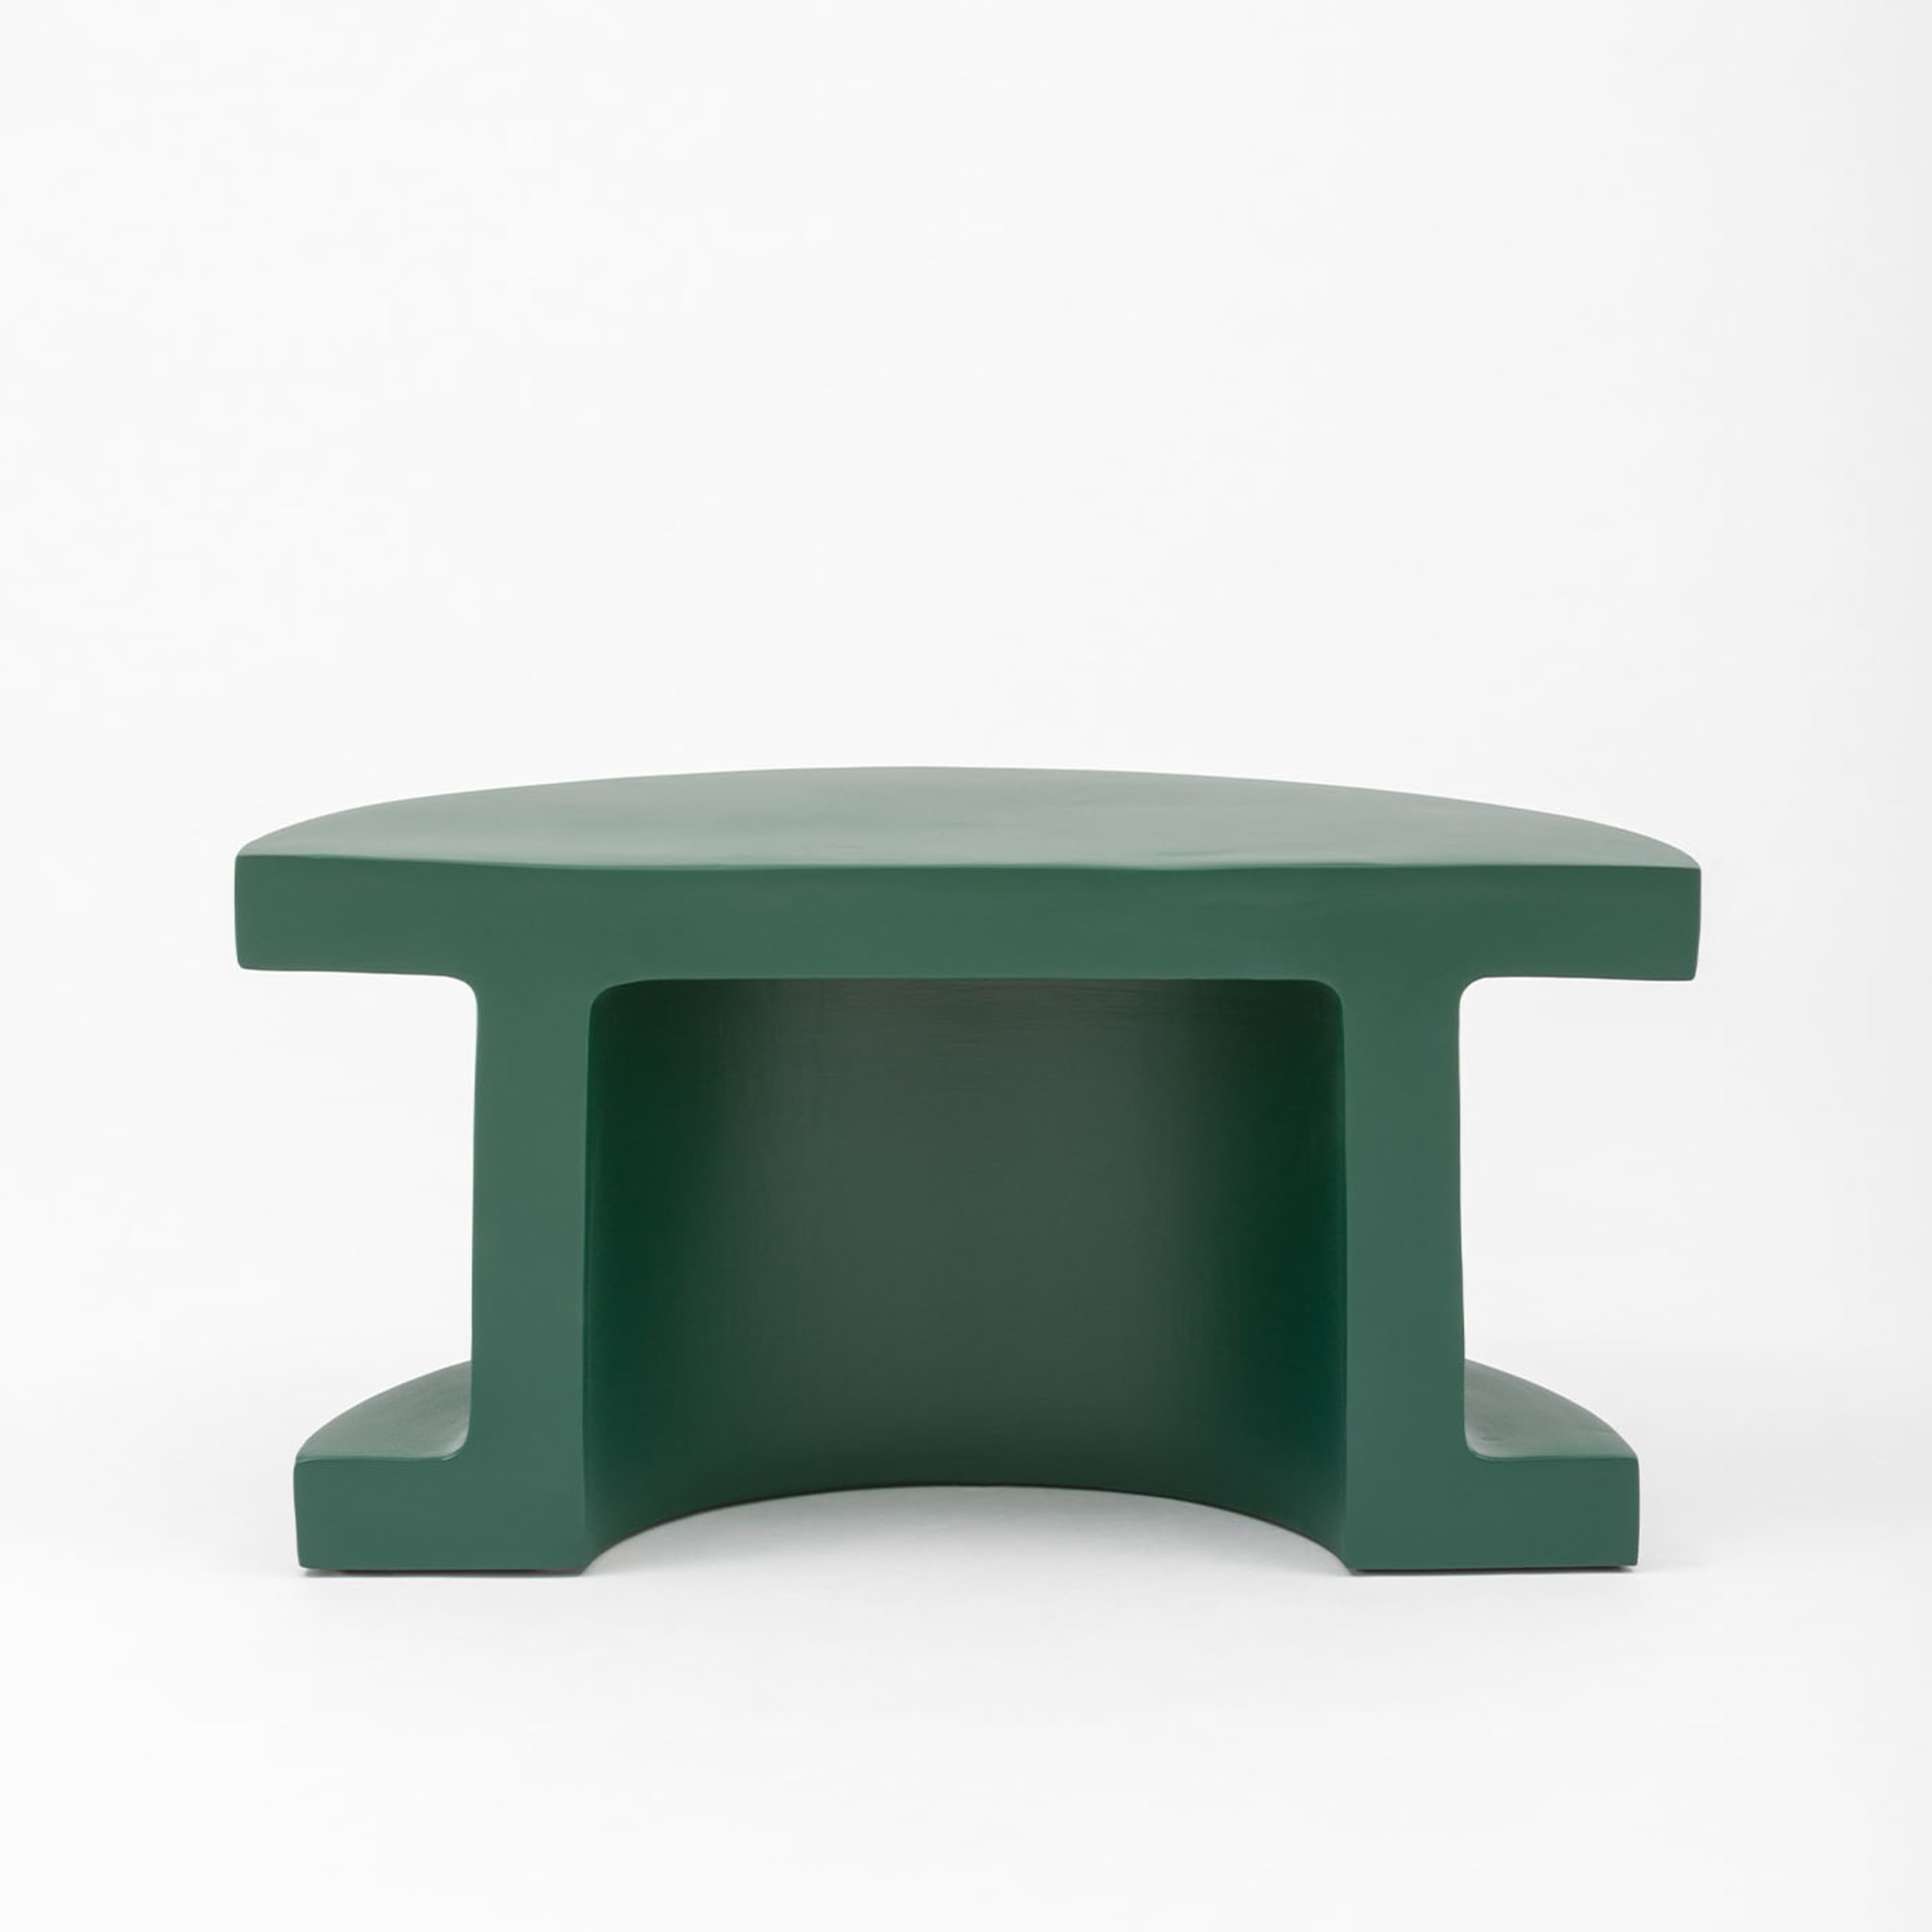 Slice Green Side Table - Alternative view 1